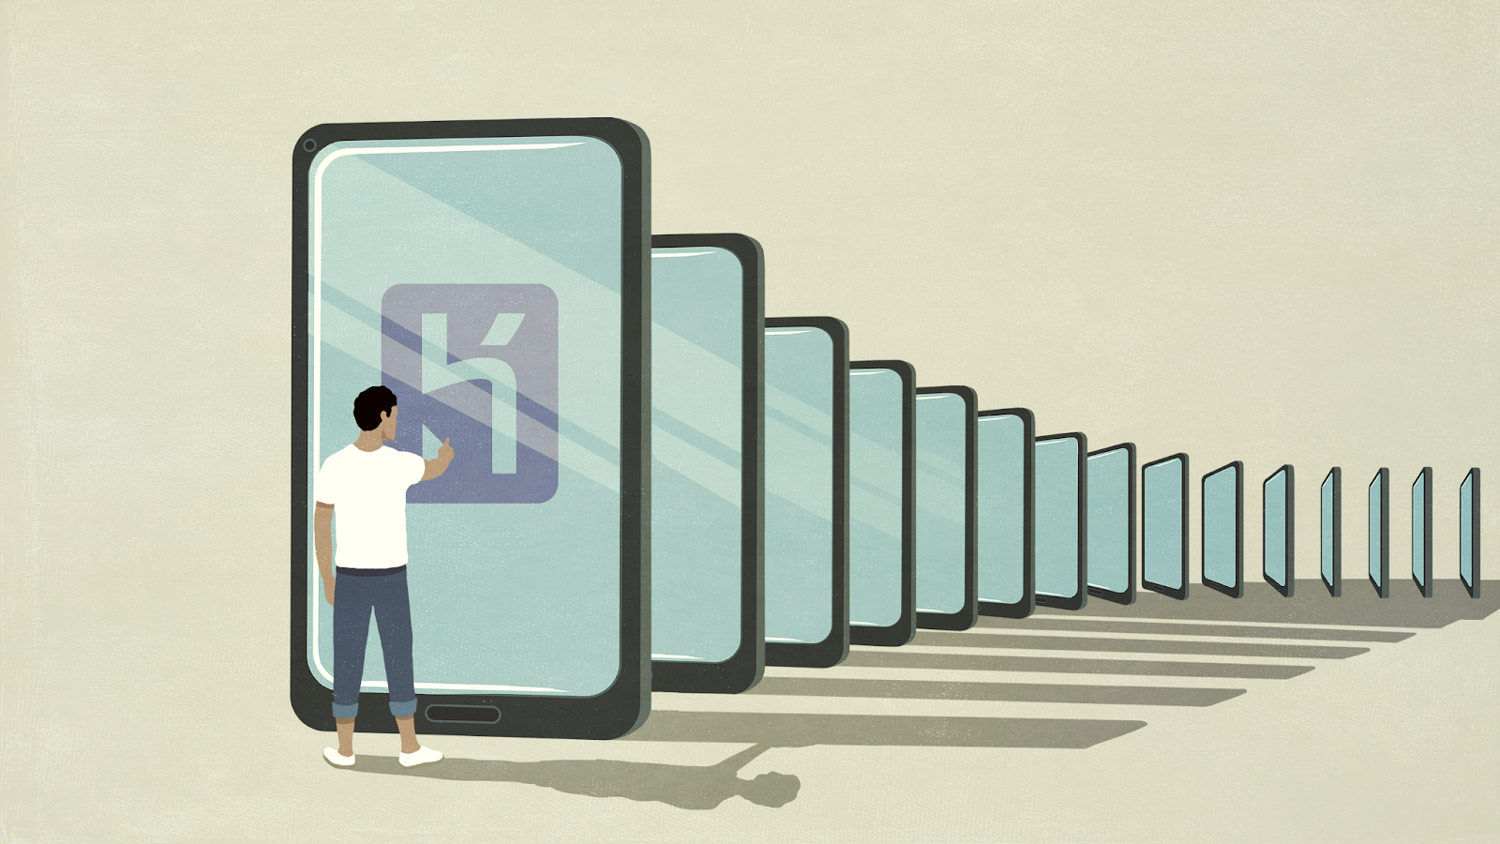 Illustration of a guy standing in front of multiple mobile phones. There is a Heroku logo on the screen closest to him and he's touching it.